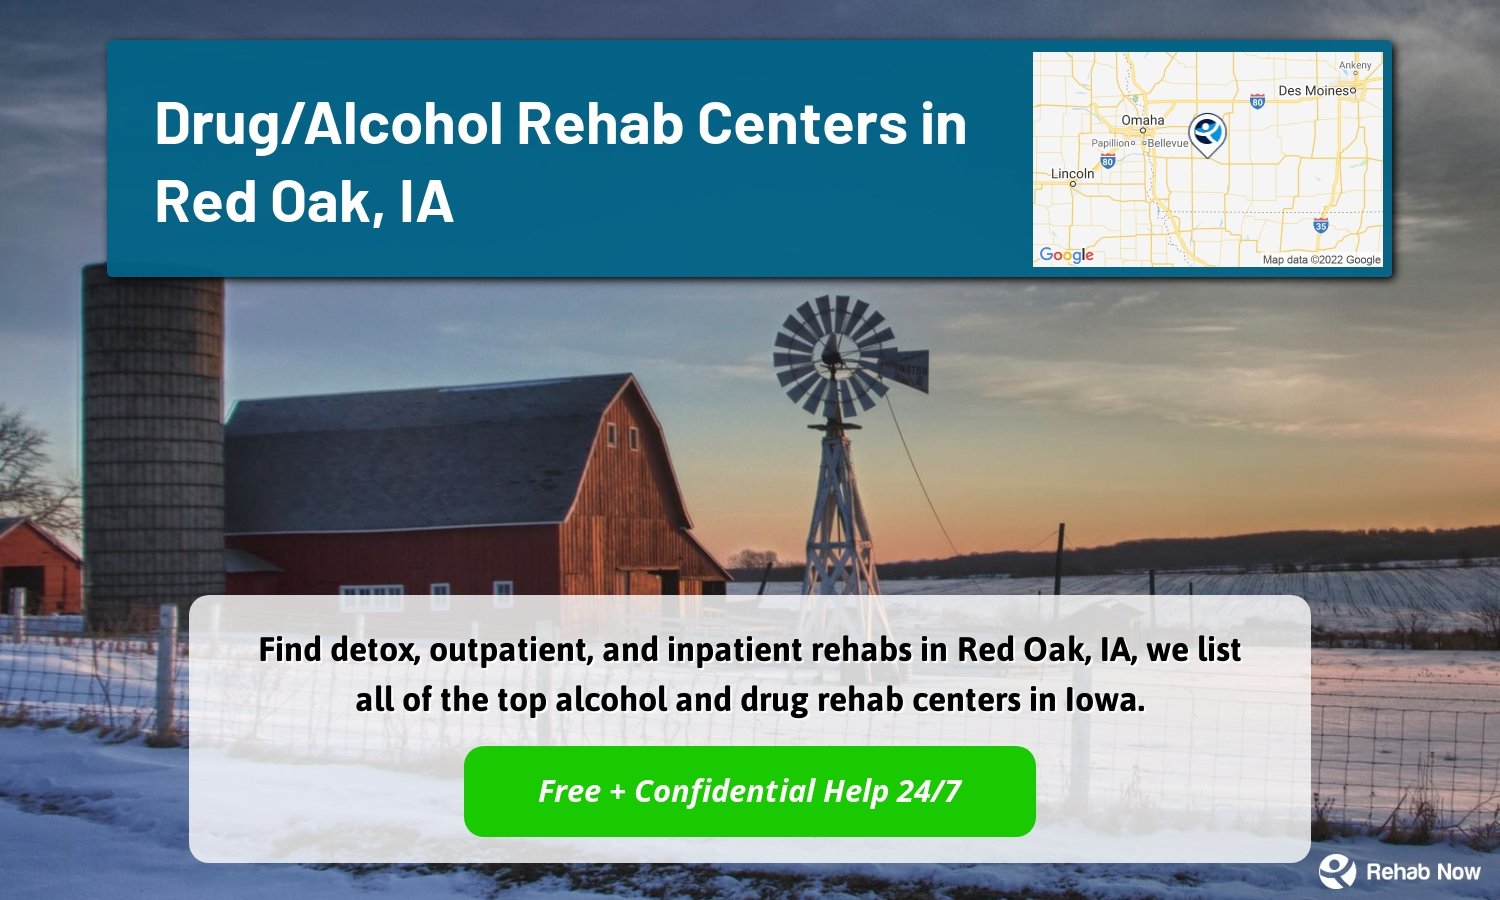 Find detox, outpatient, and inpatient rehabs in Red Oak, IA, we list all of the top alcohol and drug rehab centers in Iowa.